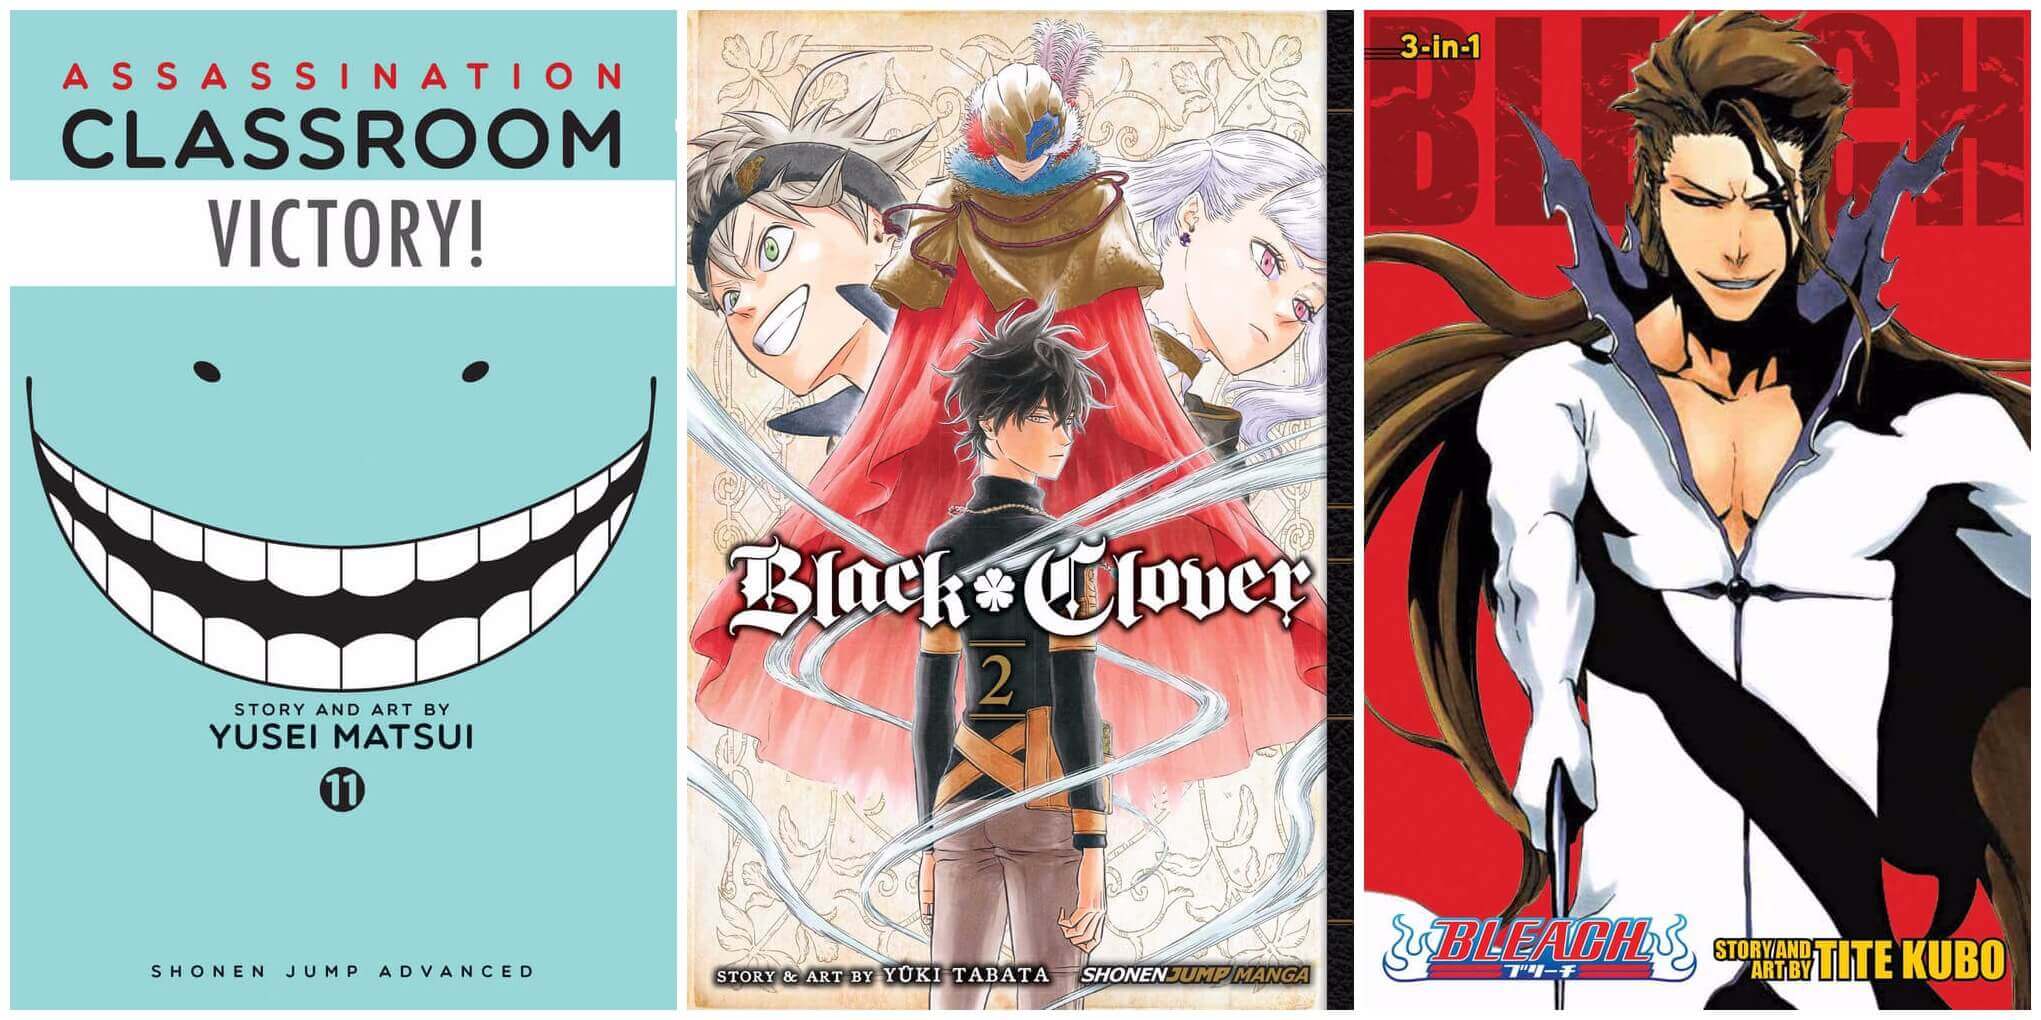 August 2016 Manga Releases The covers for Assassination Classroom, Black Clover, and Bleach.